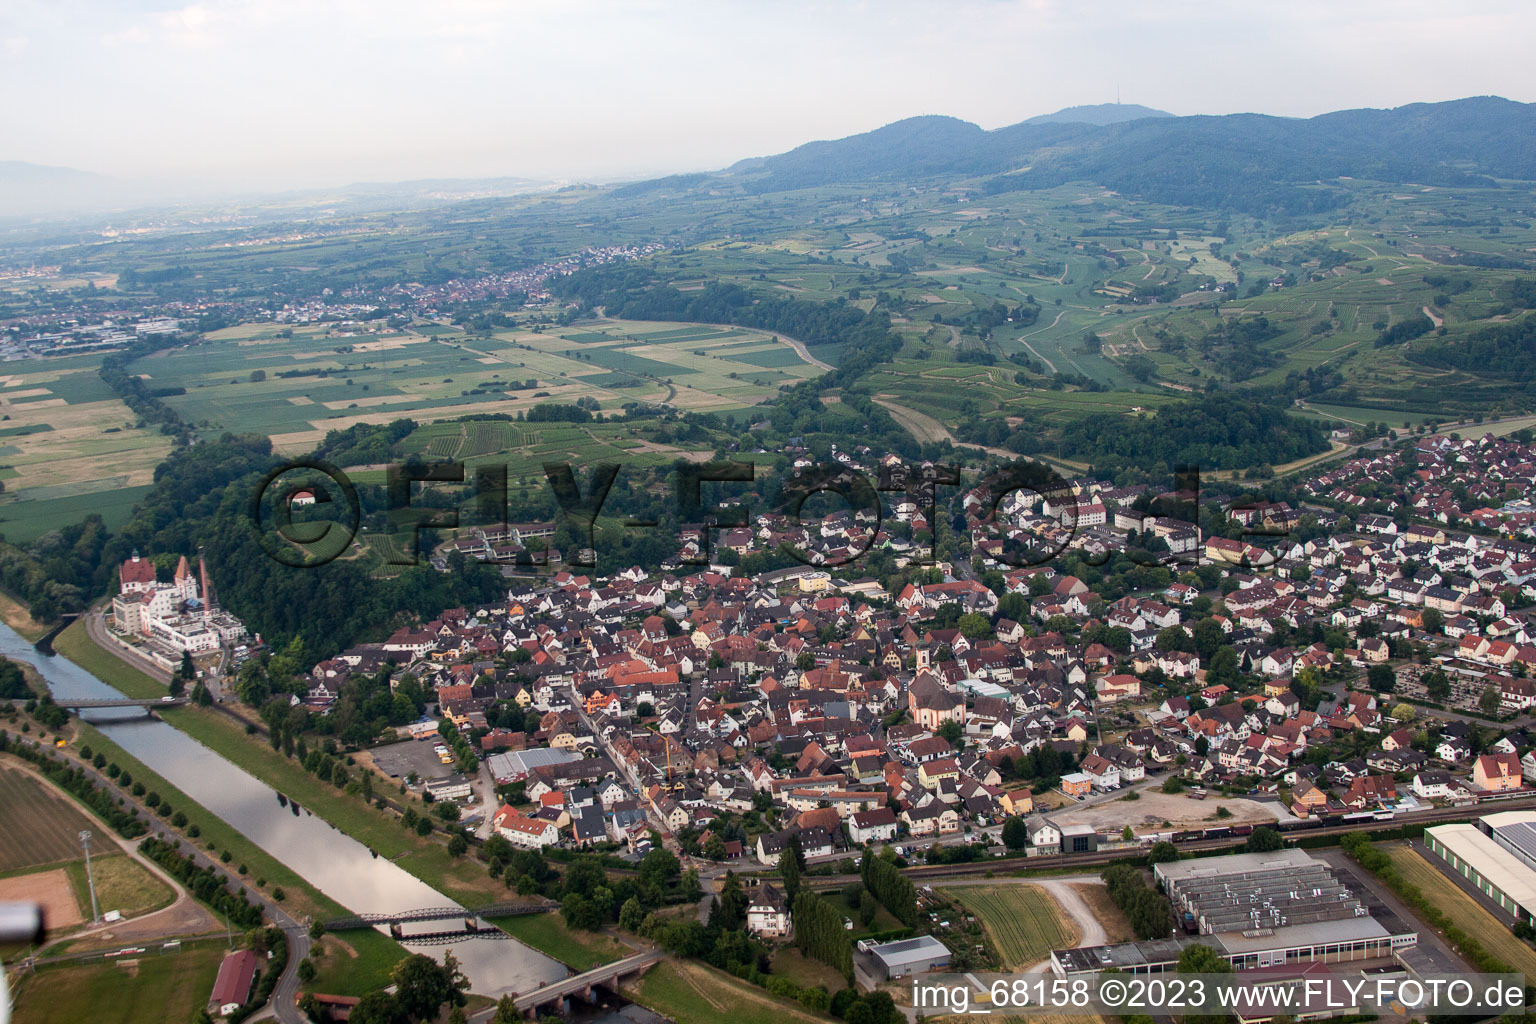 Aerial photograpy of Riegel am Kaiserstuhl in the state Baden-Wuerttemberg, Germany